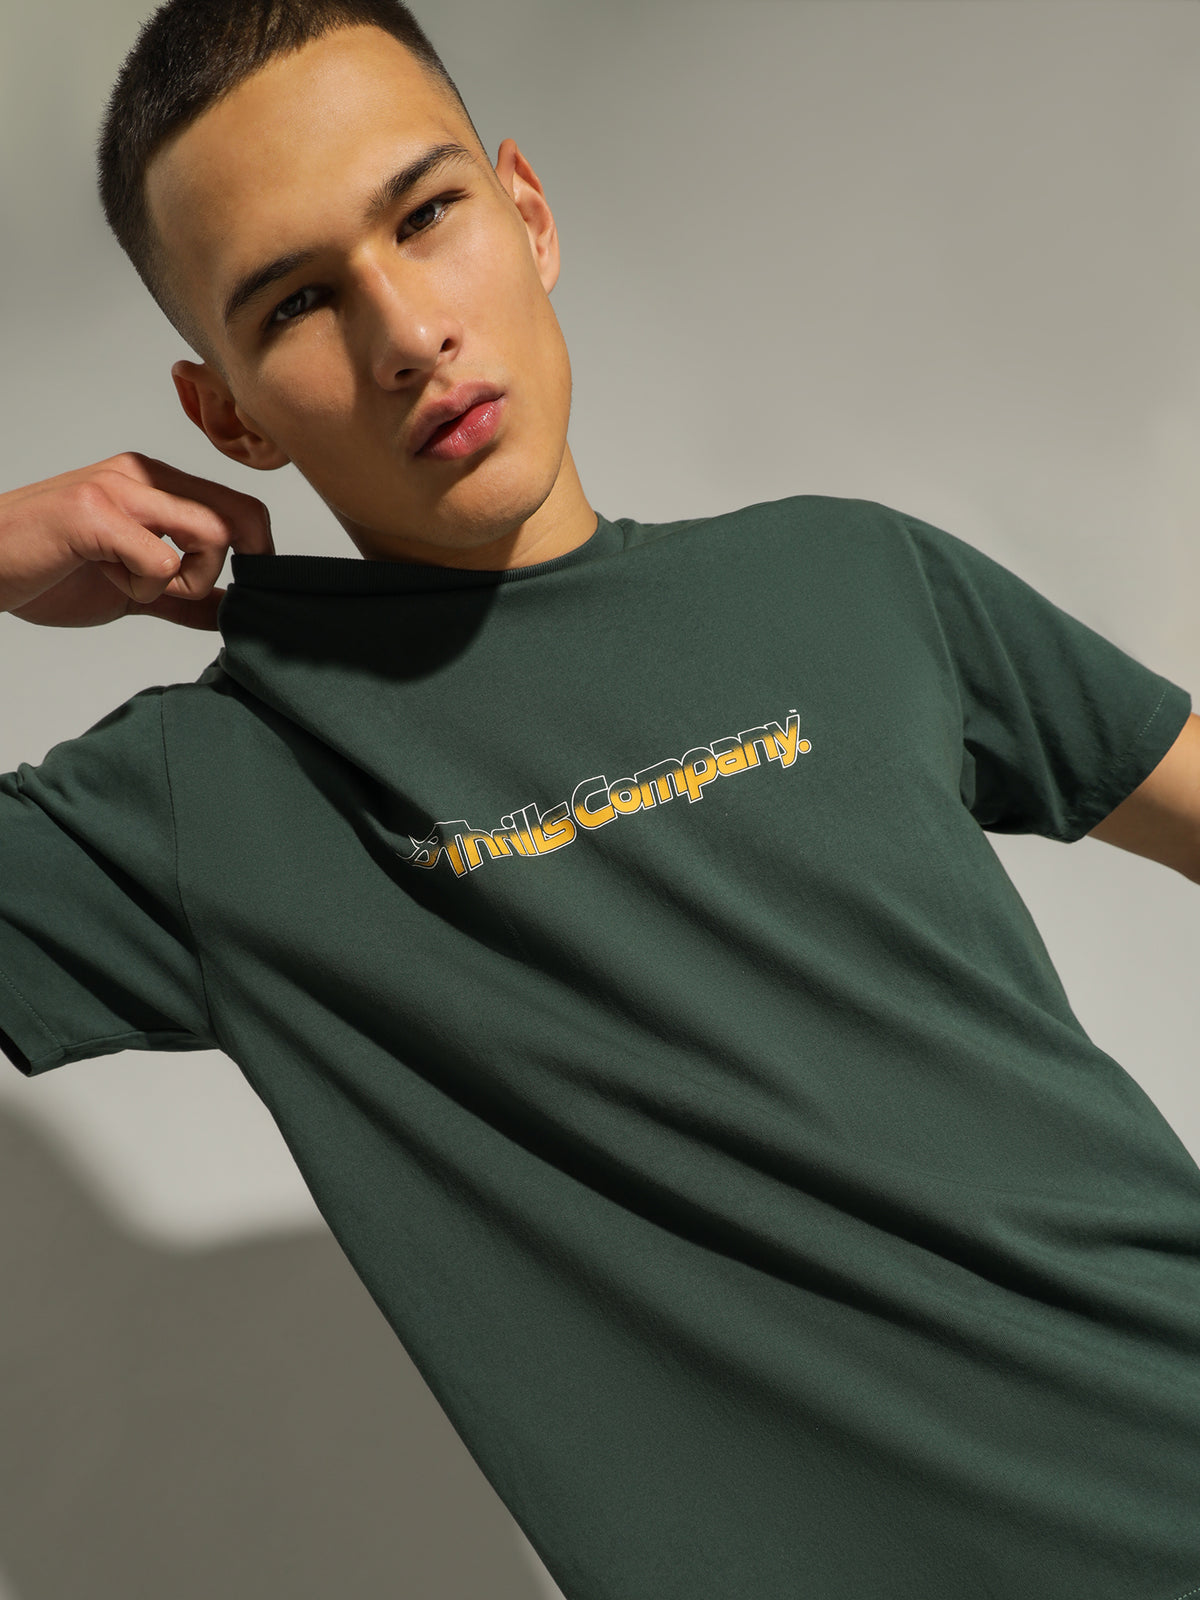 Healer Merch Fit T-Shirt in Sycamore